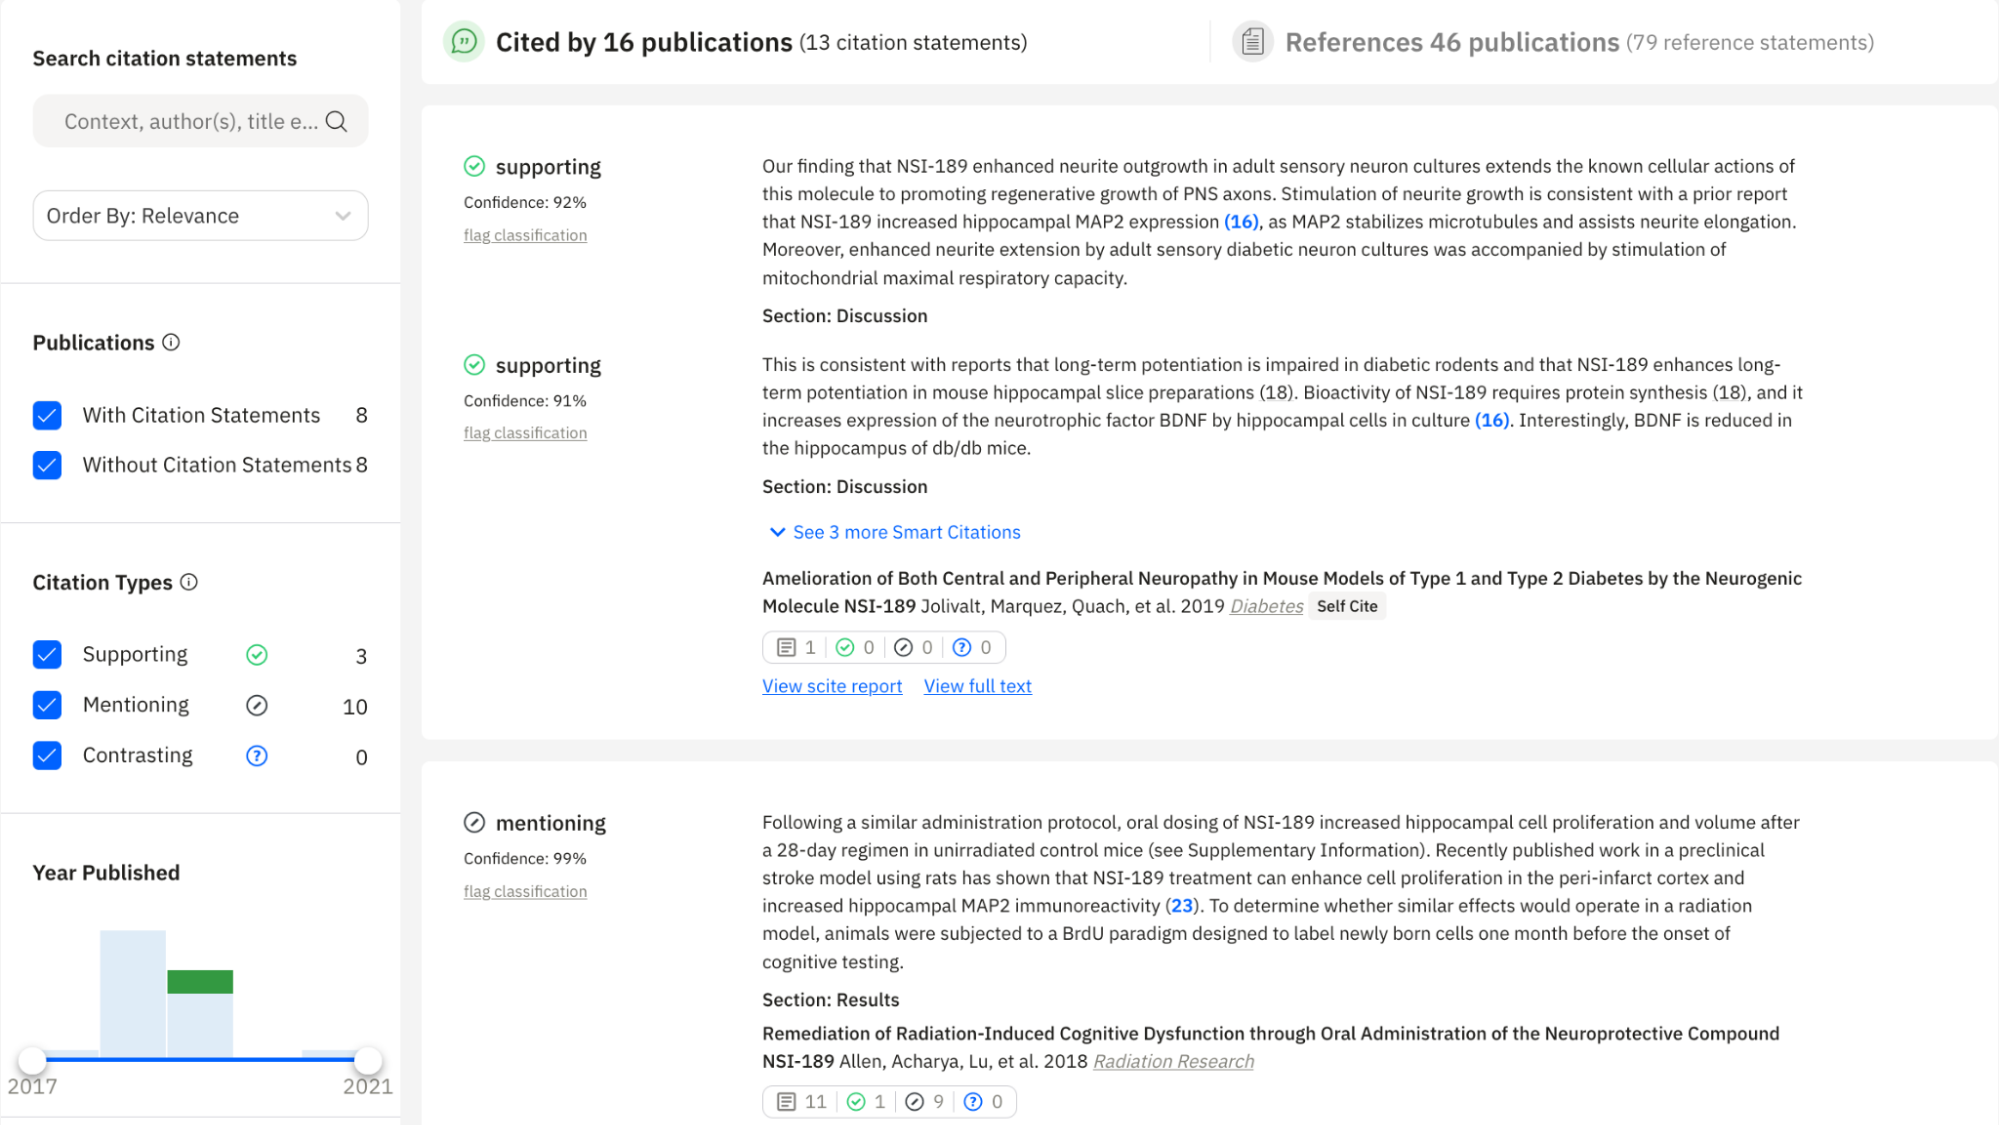 Grouped Smart Citations from the report page showing the title of the citing publications as well as the extracted textual contexts, allowing you to see how they referenced the paper of interest.